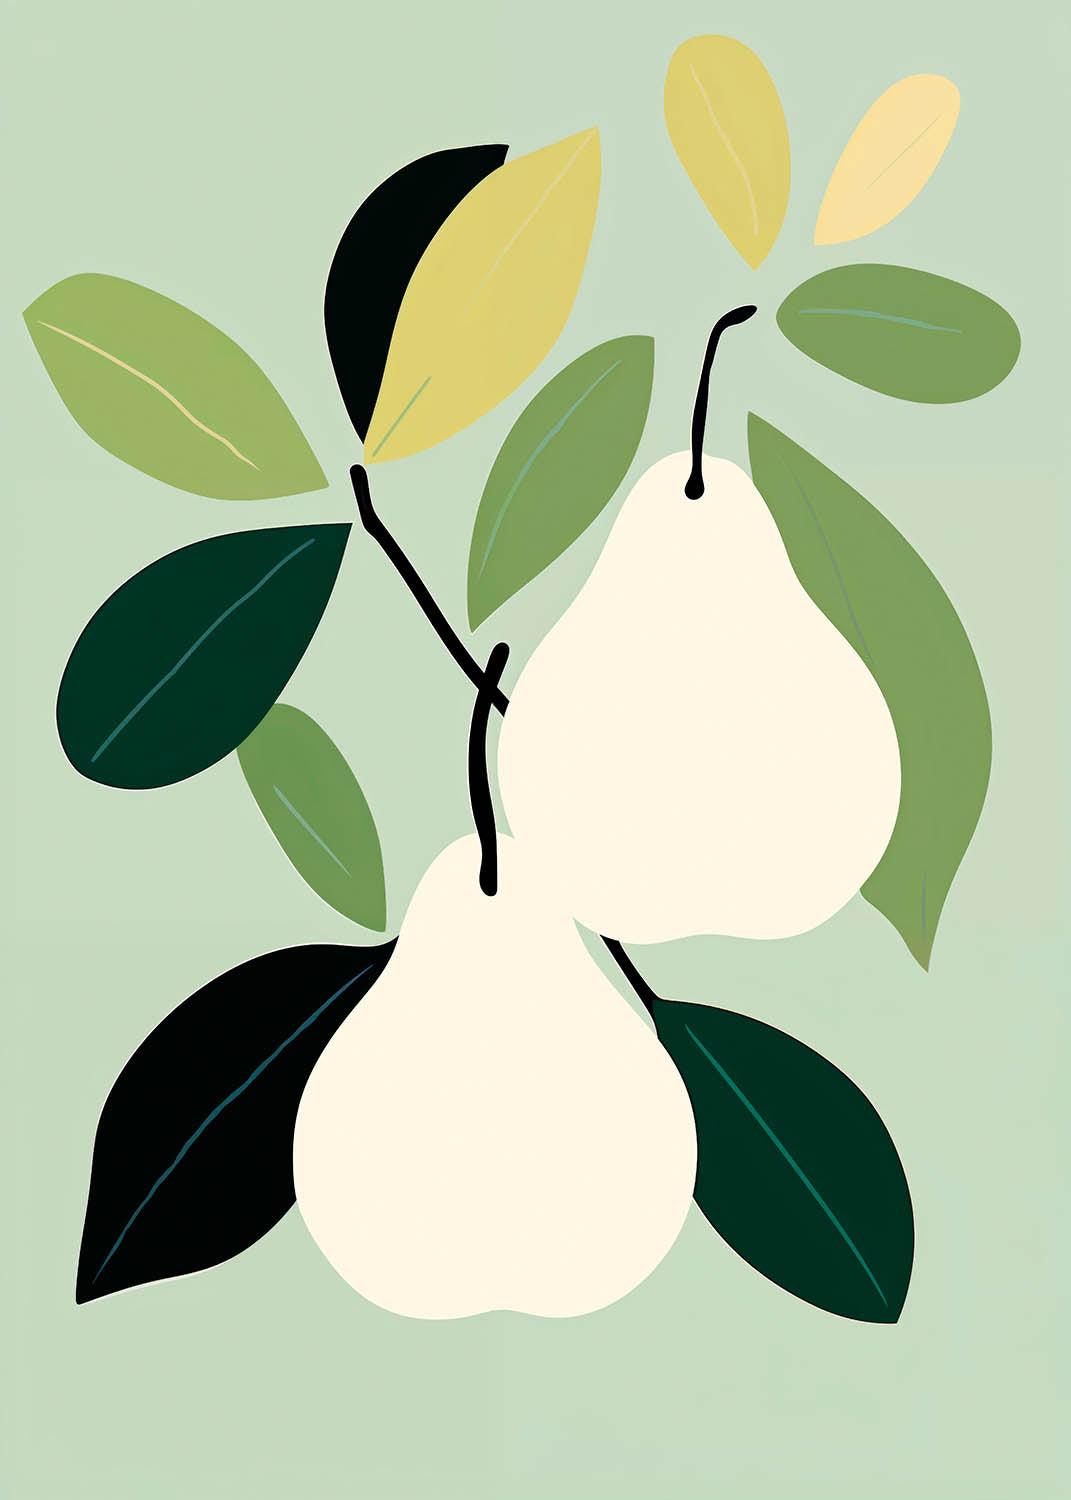 Artistic poster with a minimalist design of two stylized pears and leaves in a palette of soft greens, yellows, and black, set against a muted green background.